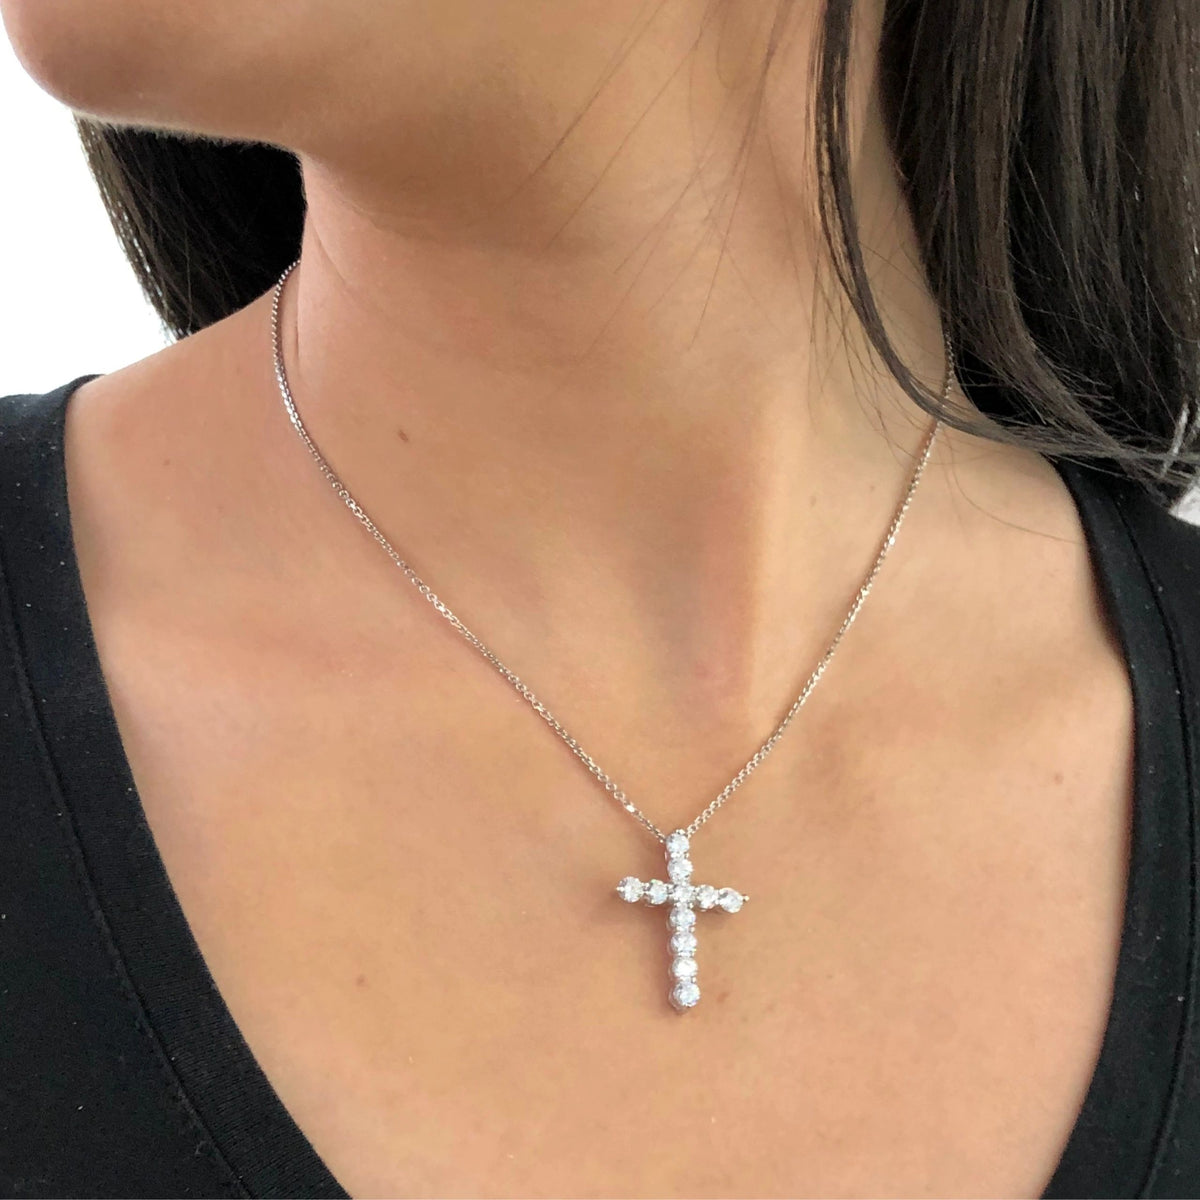 LIV Platinum plated sterling silver cross necklace with simulated diamonds